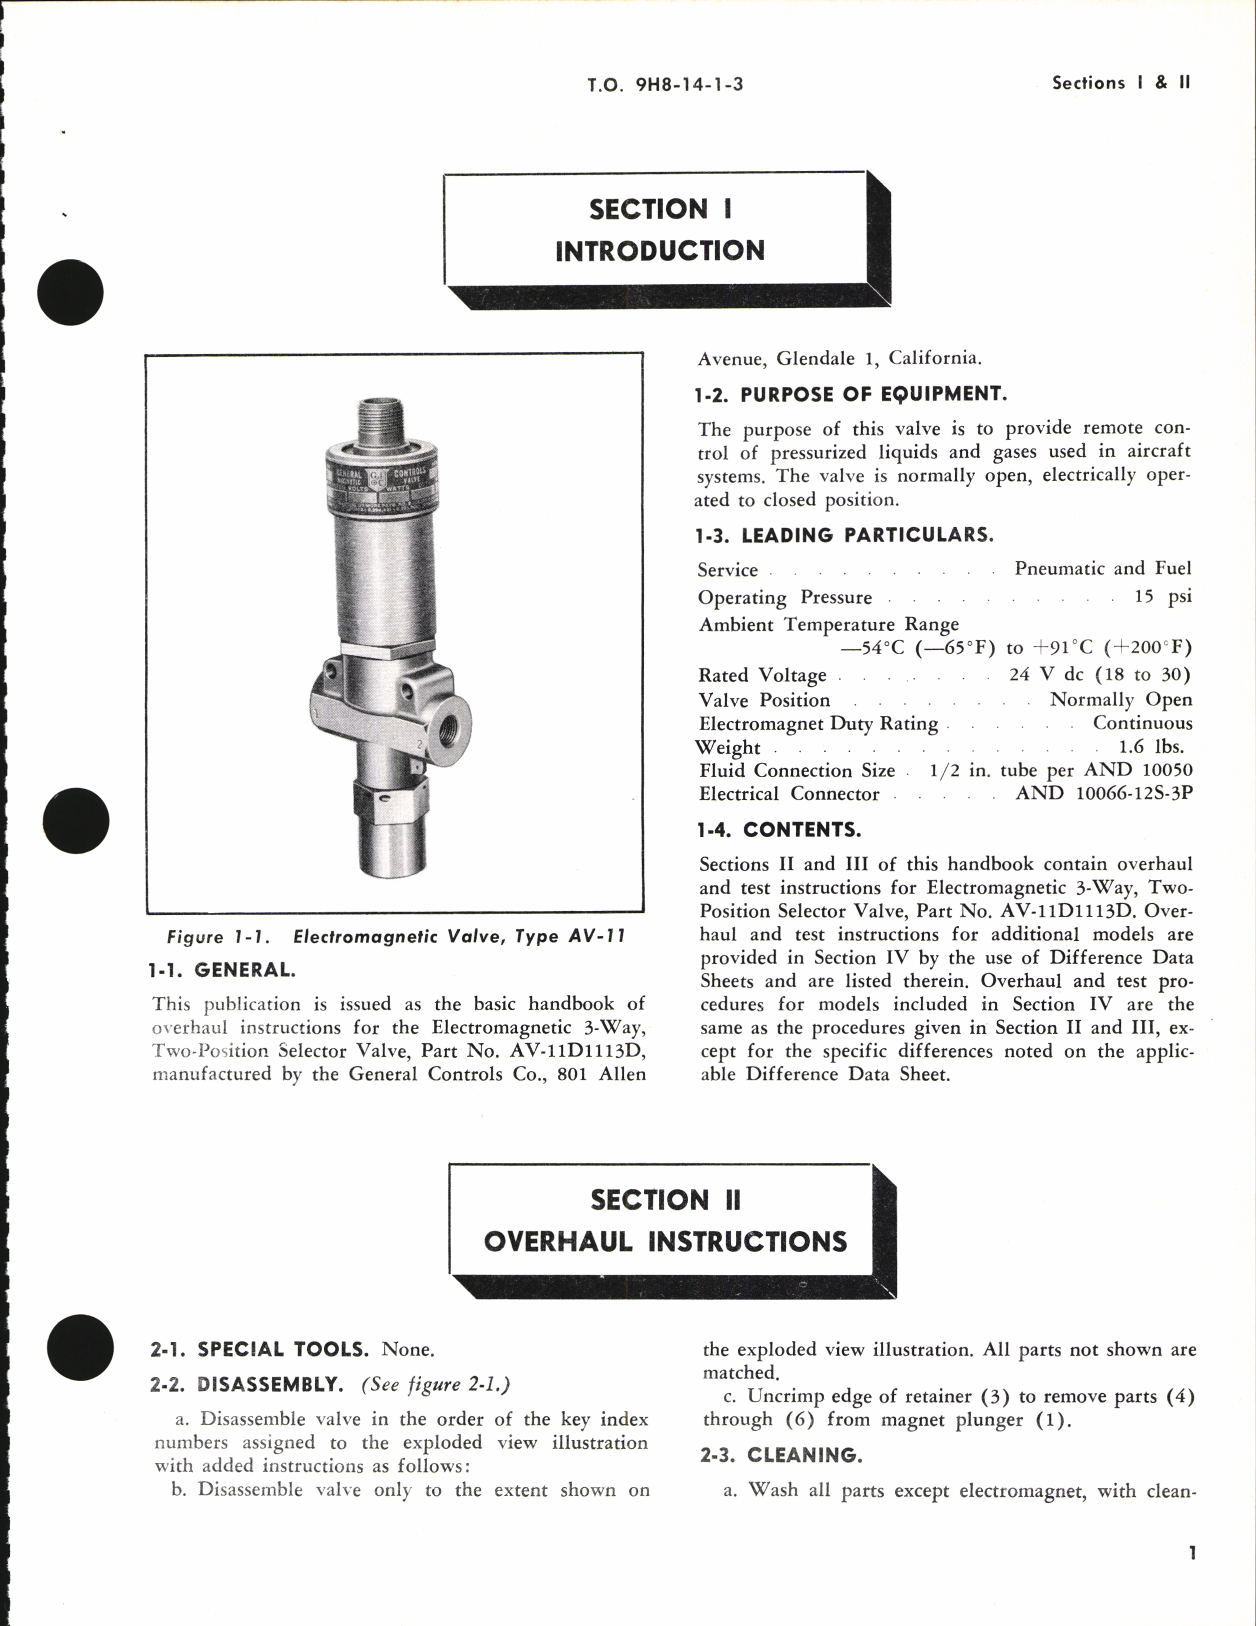 Sample page 5 from AirCorps Library document: Handbook of Overhaul Instructions for Electro Magnetic 3-way, Two Position Selector Valve